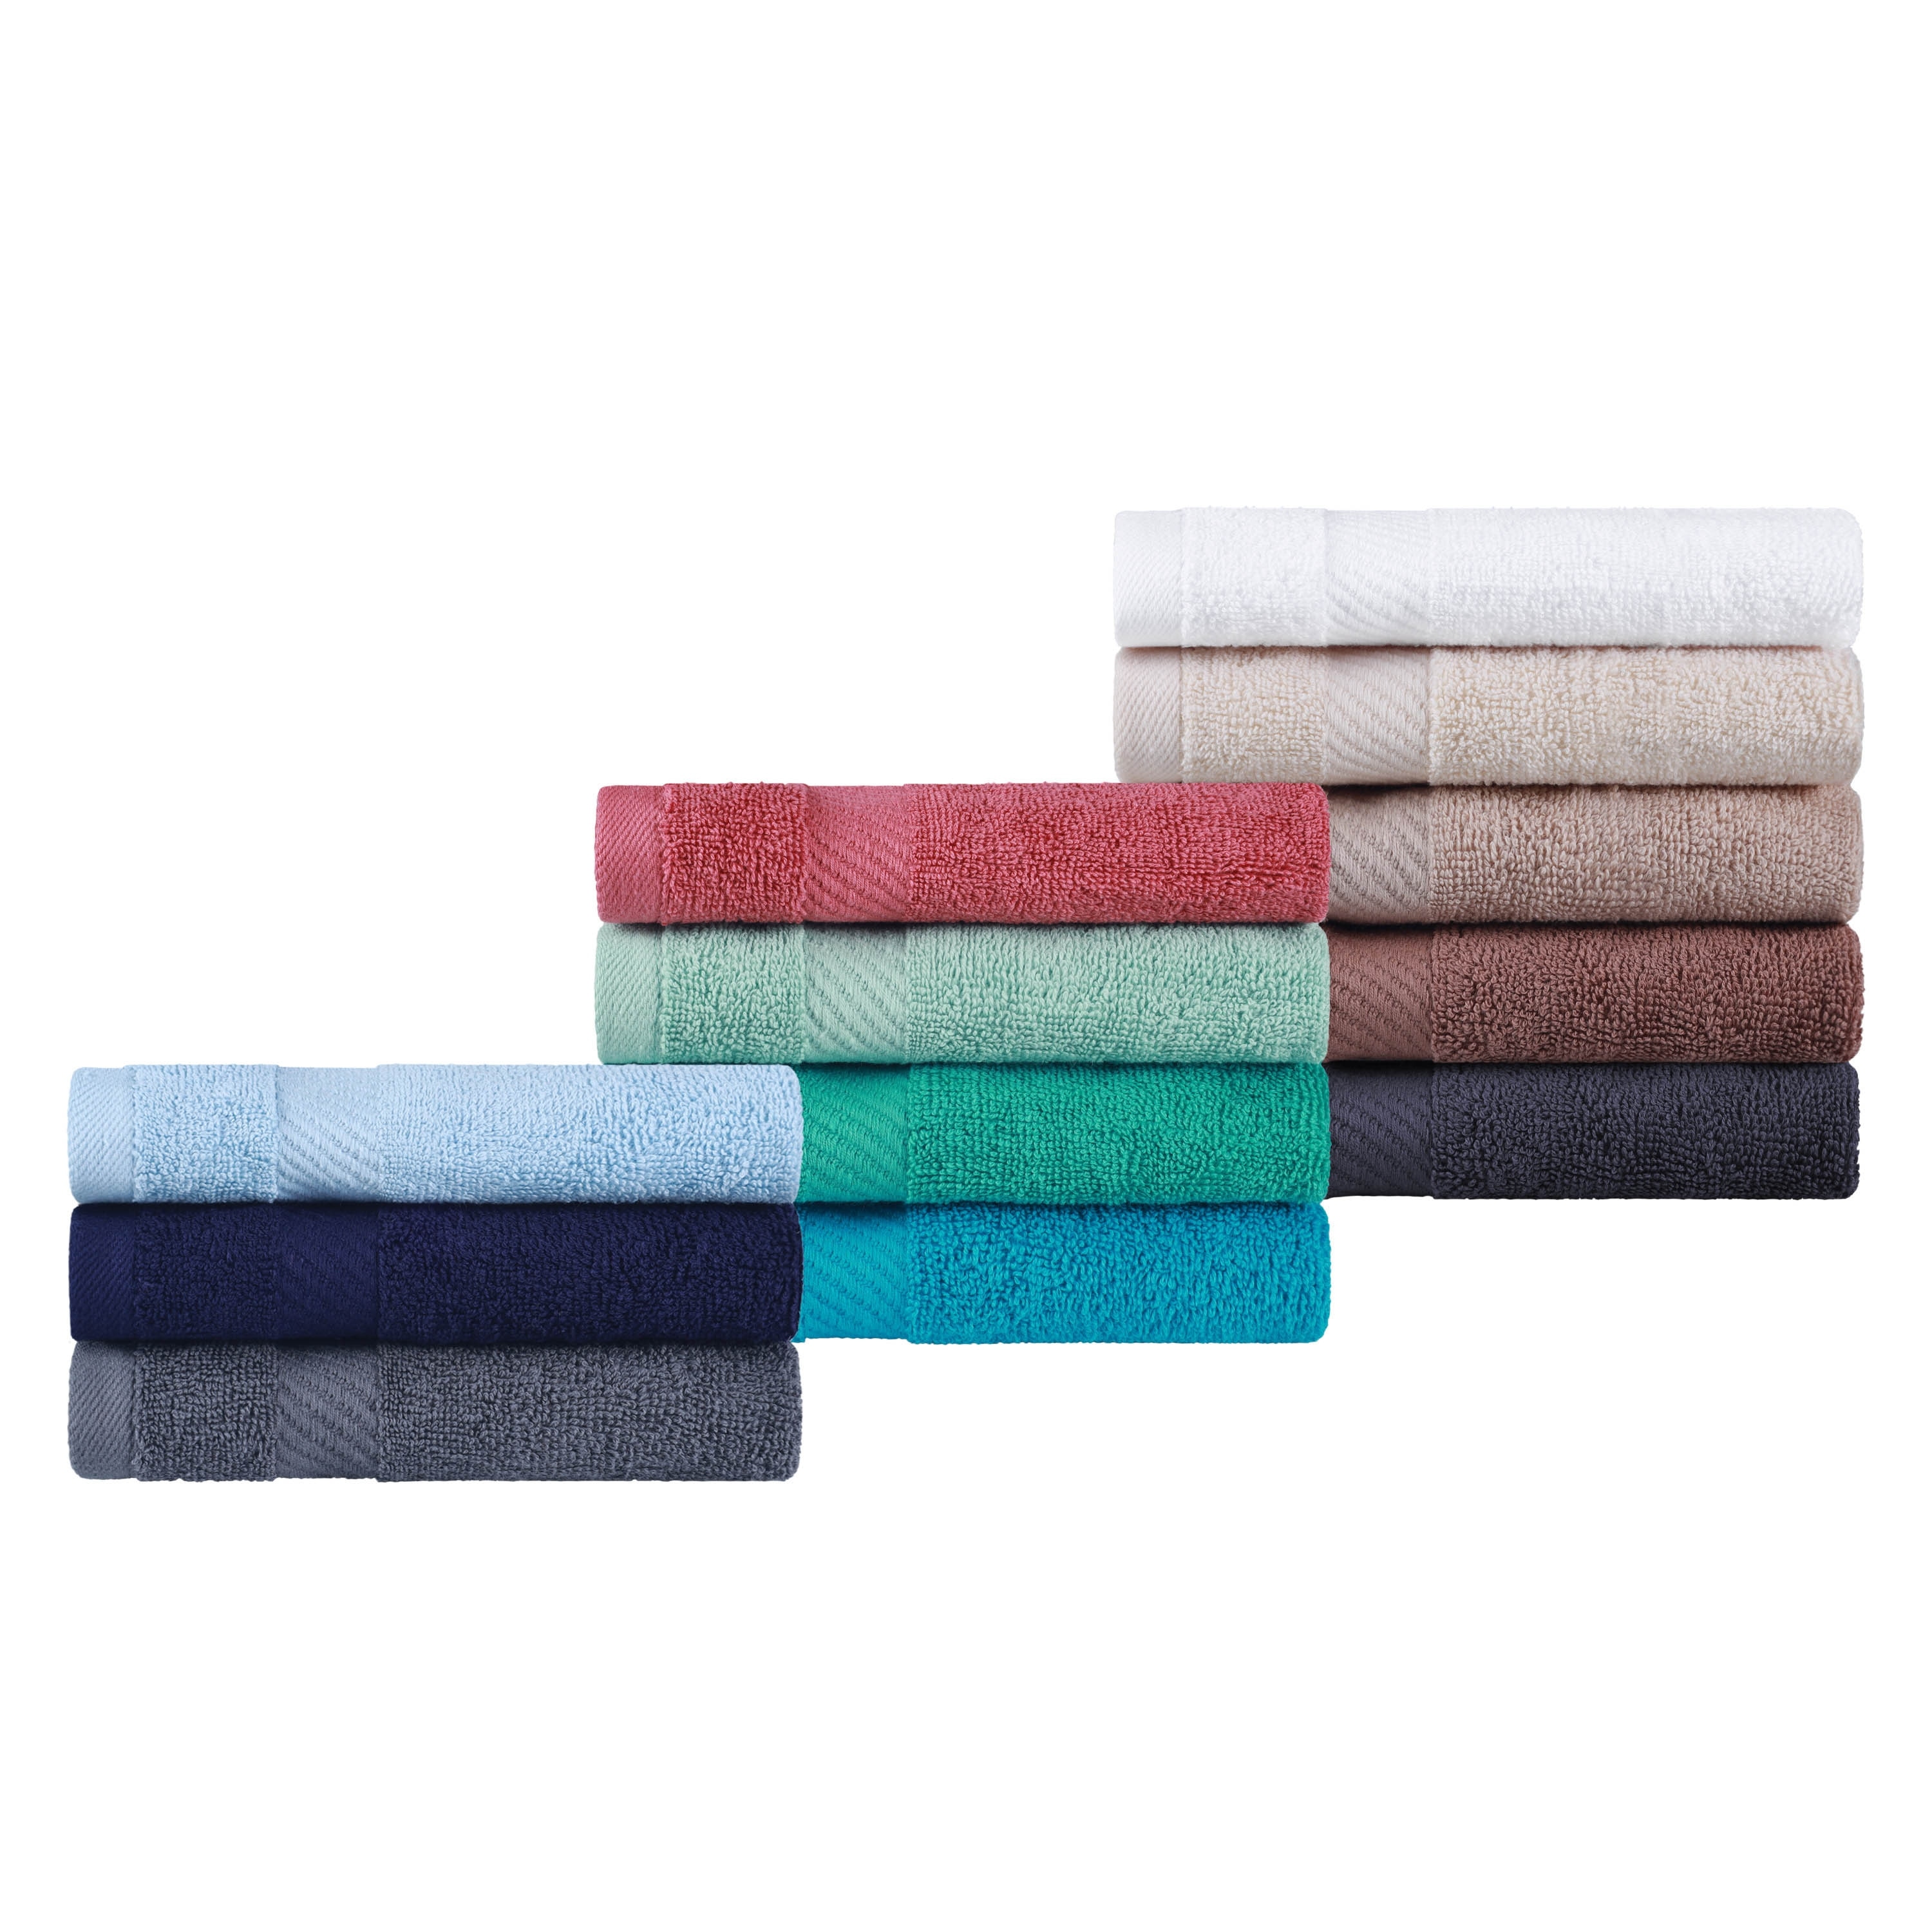 https://ak1.ostkcdn.com/images/products/is/images/direct/f804c01541c02737365dd7a0a84dc8962ca0af40/Miranda-Haus-Luxury-Solid-Highly-Absorbent-Egyptian-Cotton-2-Piece-Bath-Sheet-Towel-Set.jpg